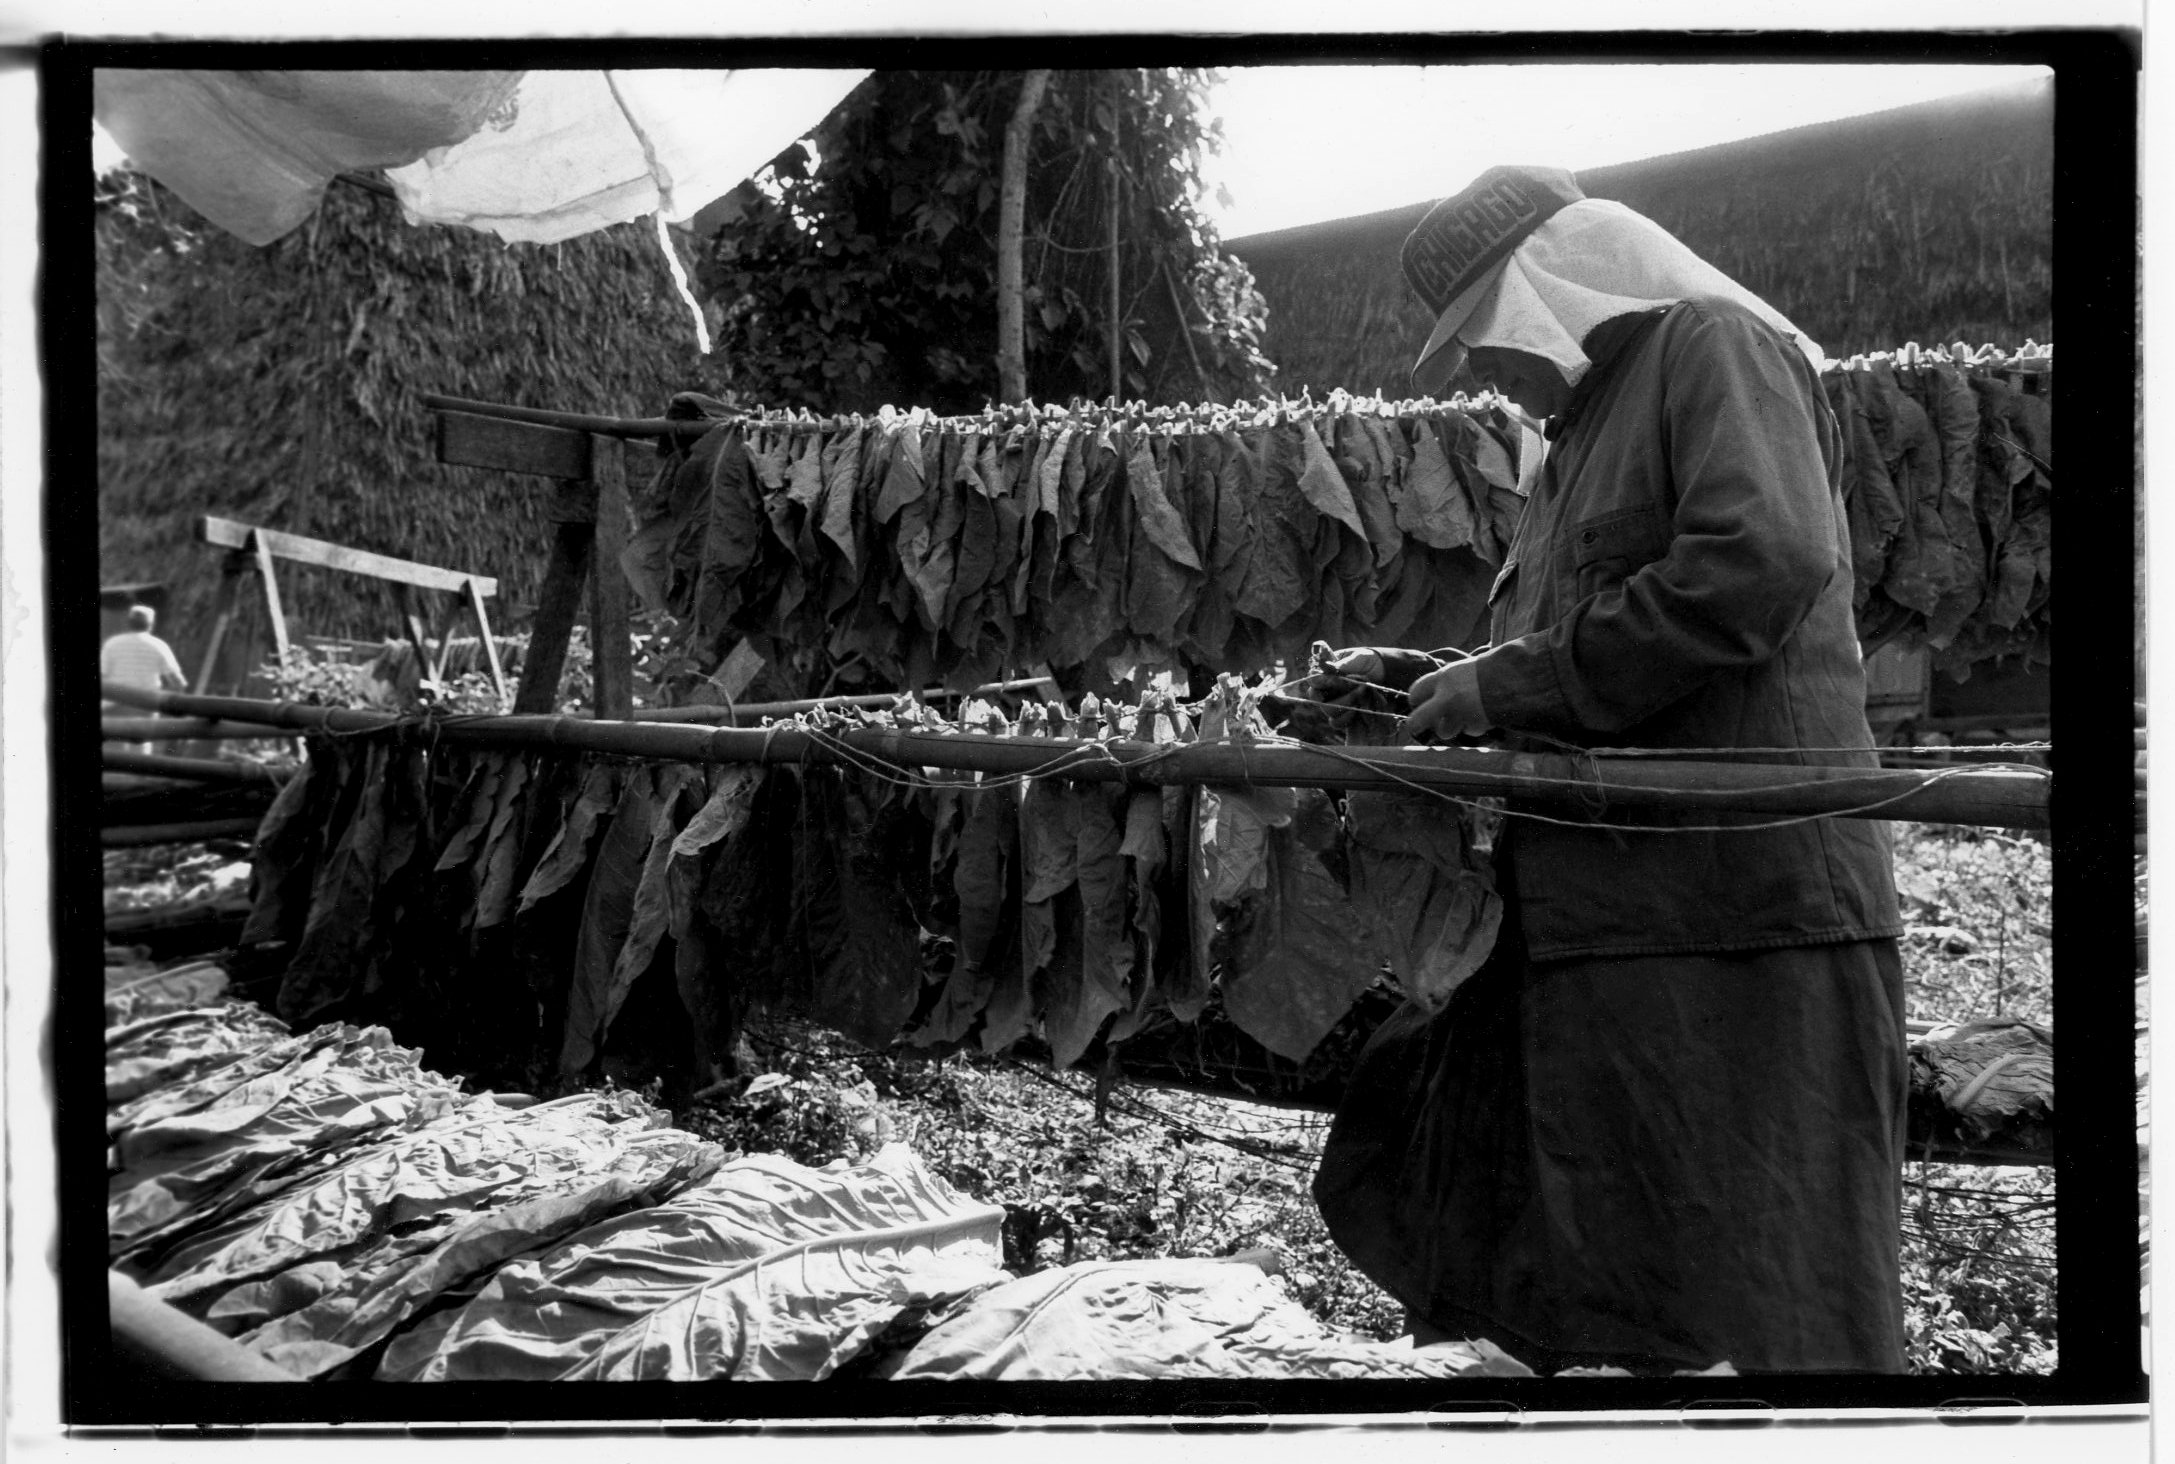  Stringing the hands of tobacco on the poles before hanging in the barns. 